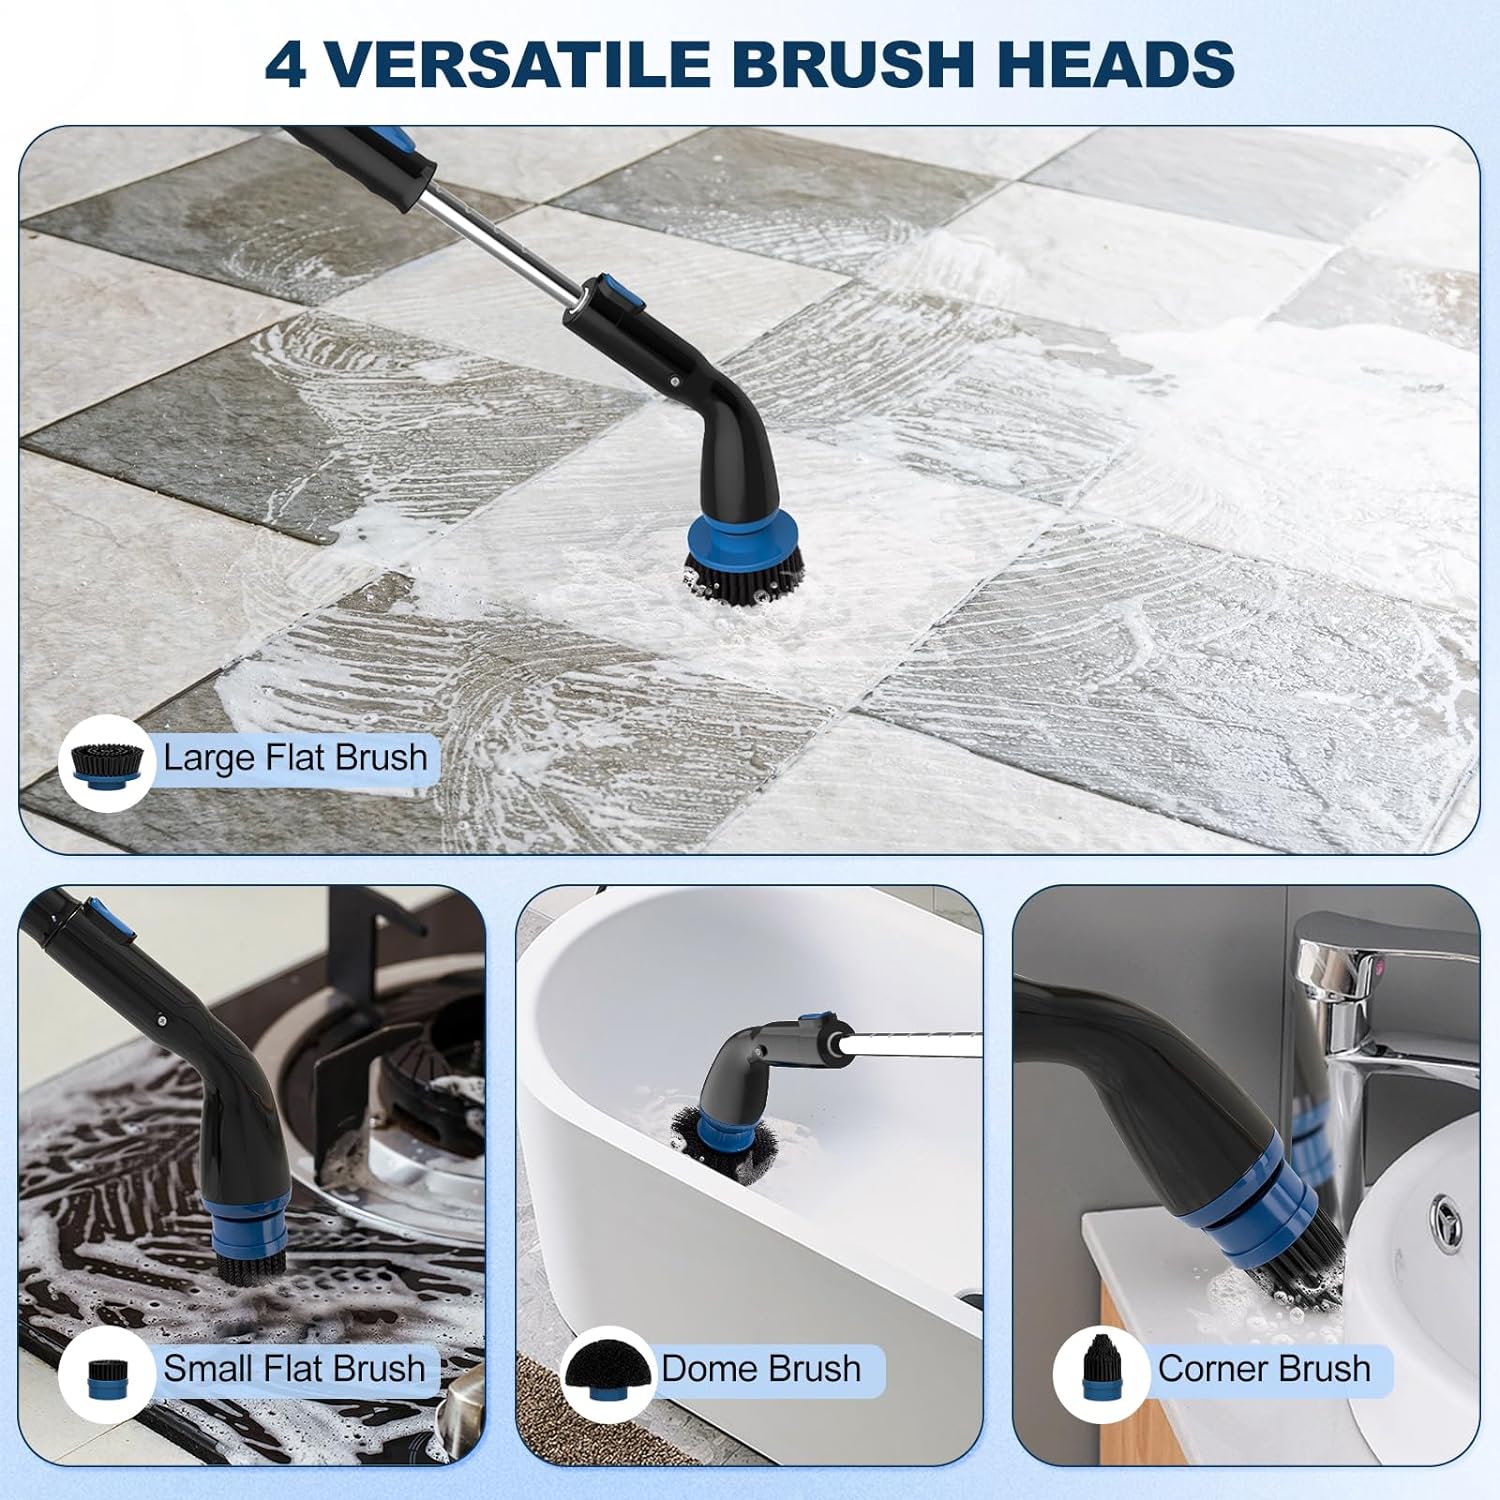 Black Electric Spin Scrubber, Cordless Cleaning Brush With 4 Replaceable Brush Heads And Adjustable Extension Handle Power Shower Scrubber For Bathroom, Kitchen, Tub, Tile, Floor